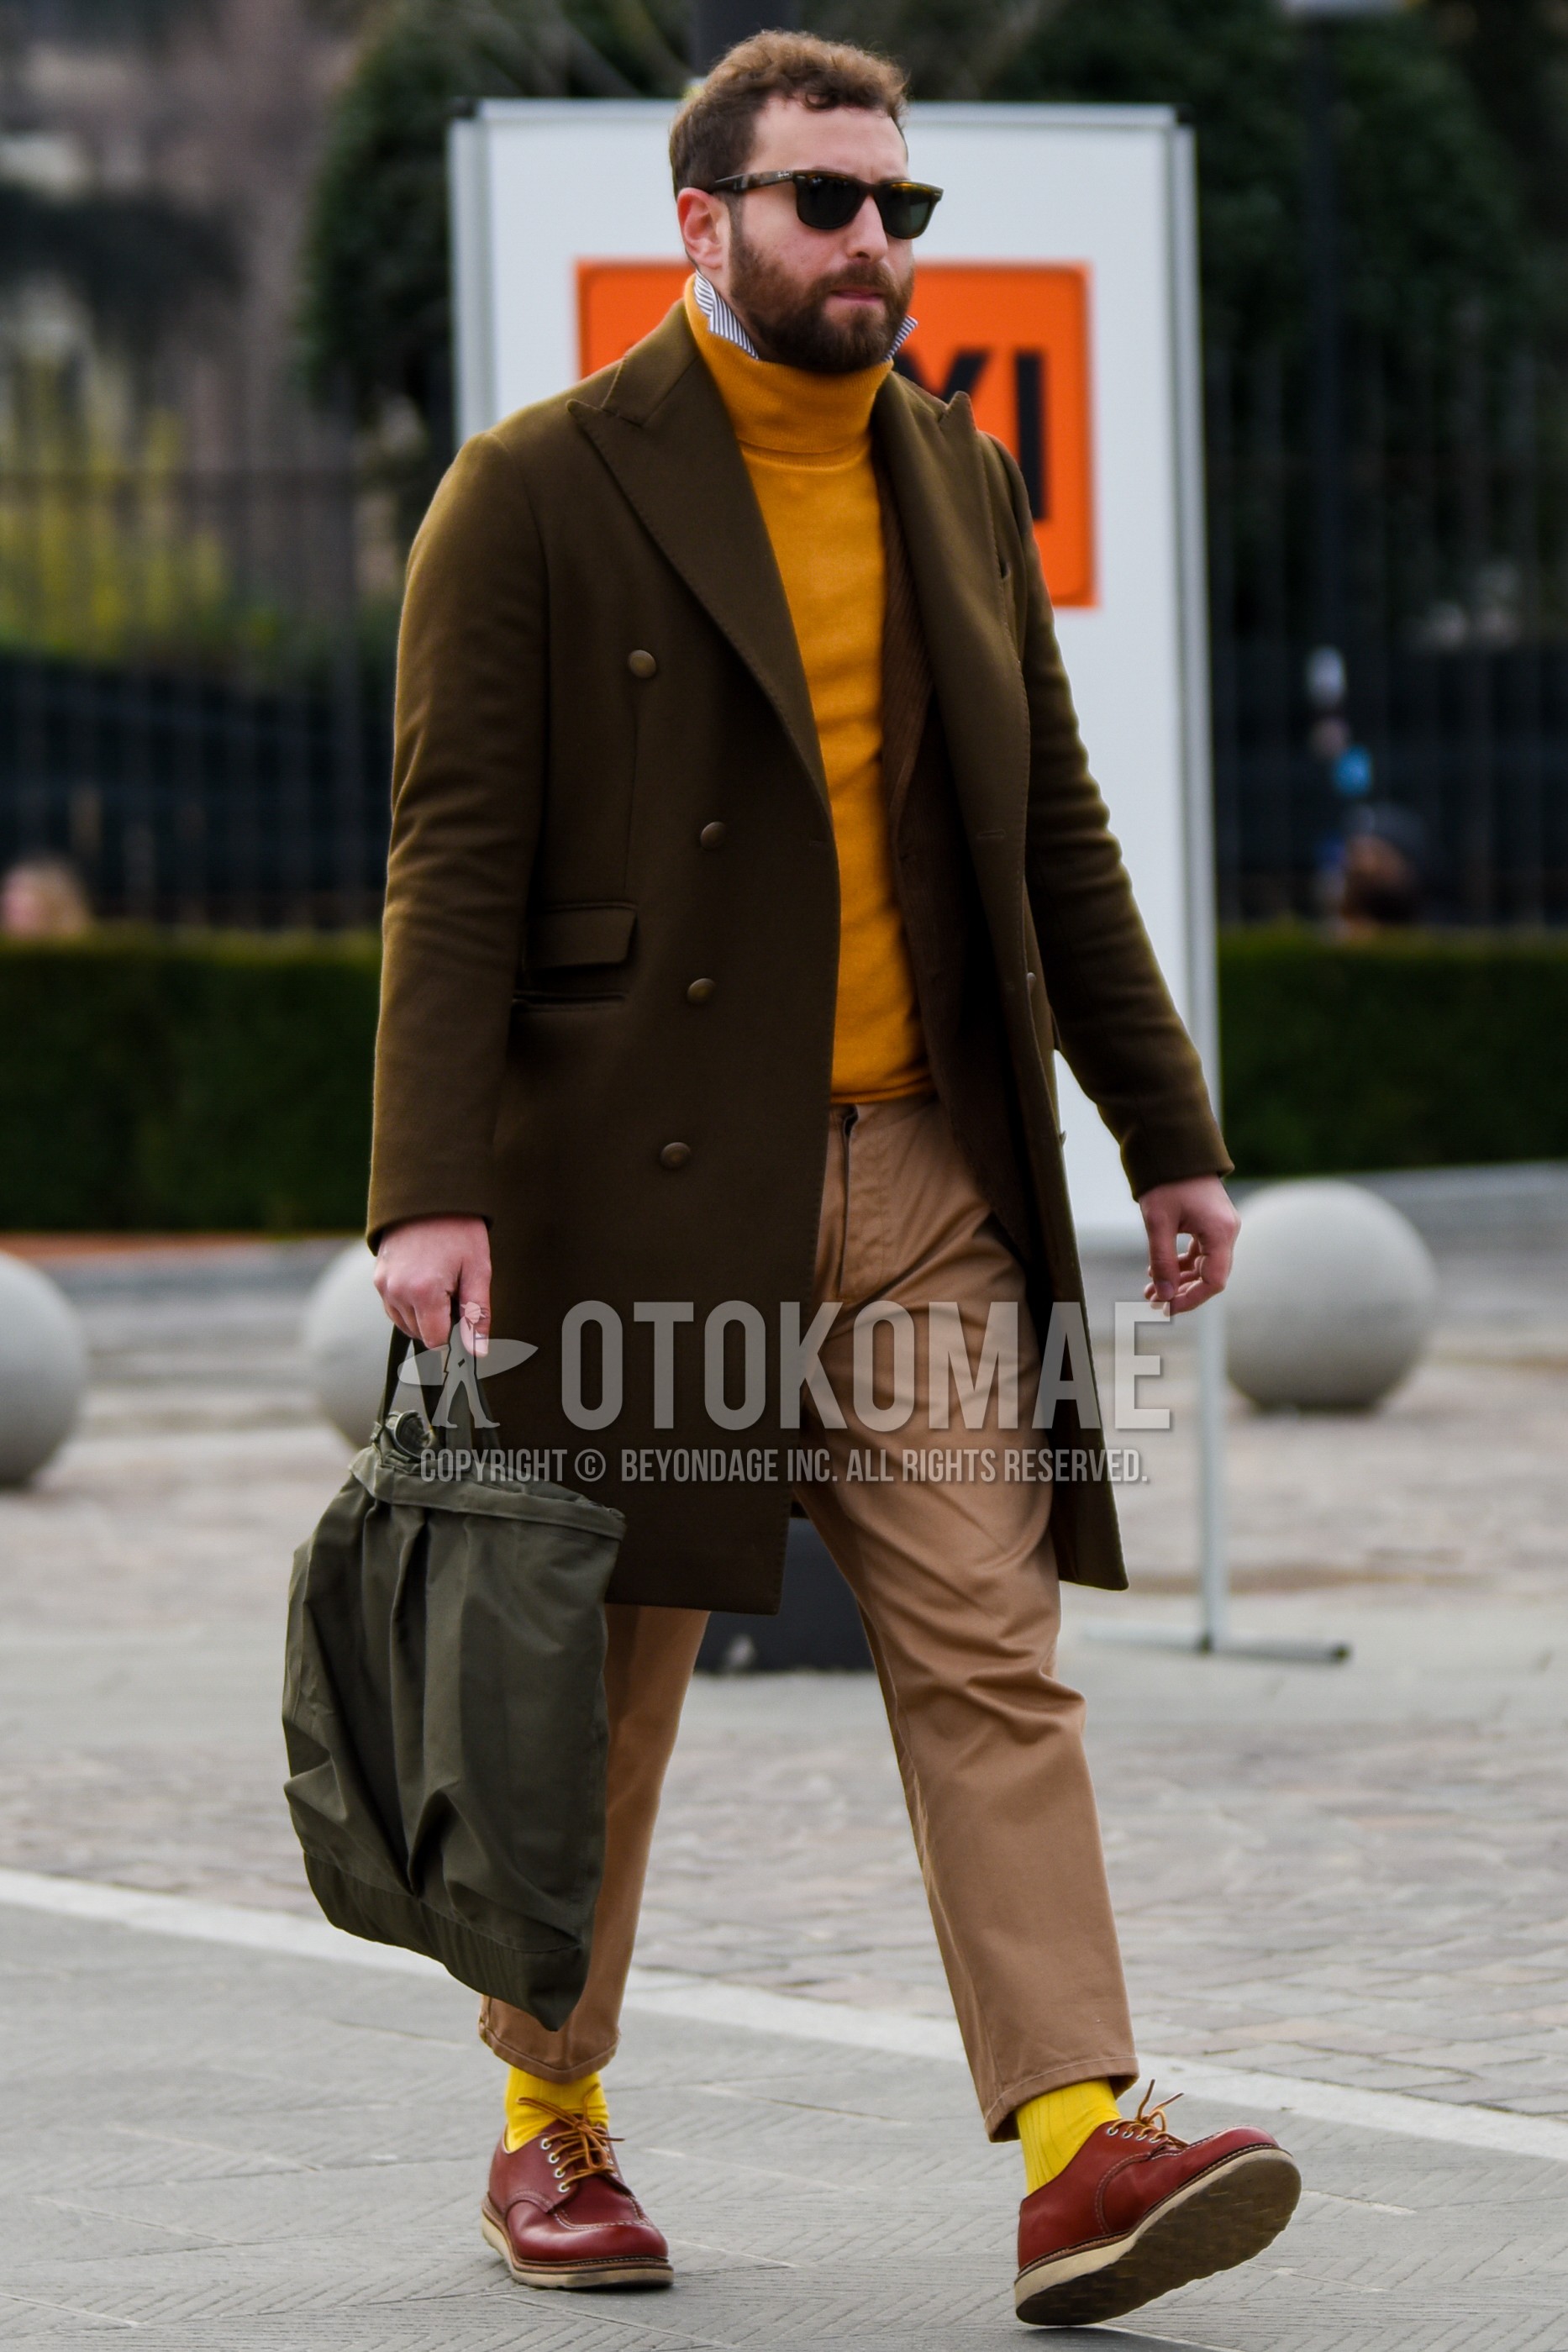 Men's autumn winter outfit with brown tortoiseshell sunglasses, olive green plain chester coat, yellow plain turtleneck knit, beige plain chinos, beige plain ankle pants, yellow plain socks, brown  leather shoes, olive green plain briefcase/handbag.